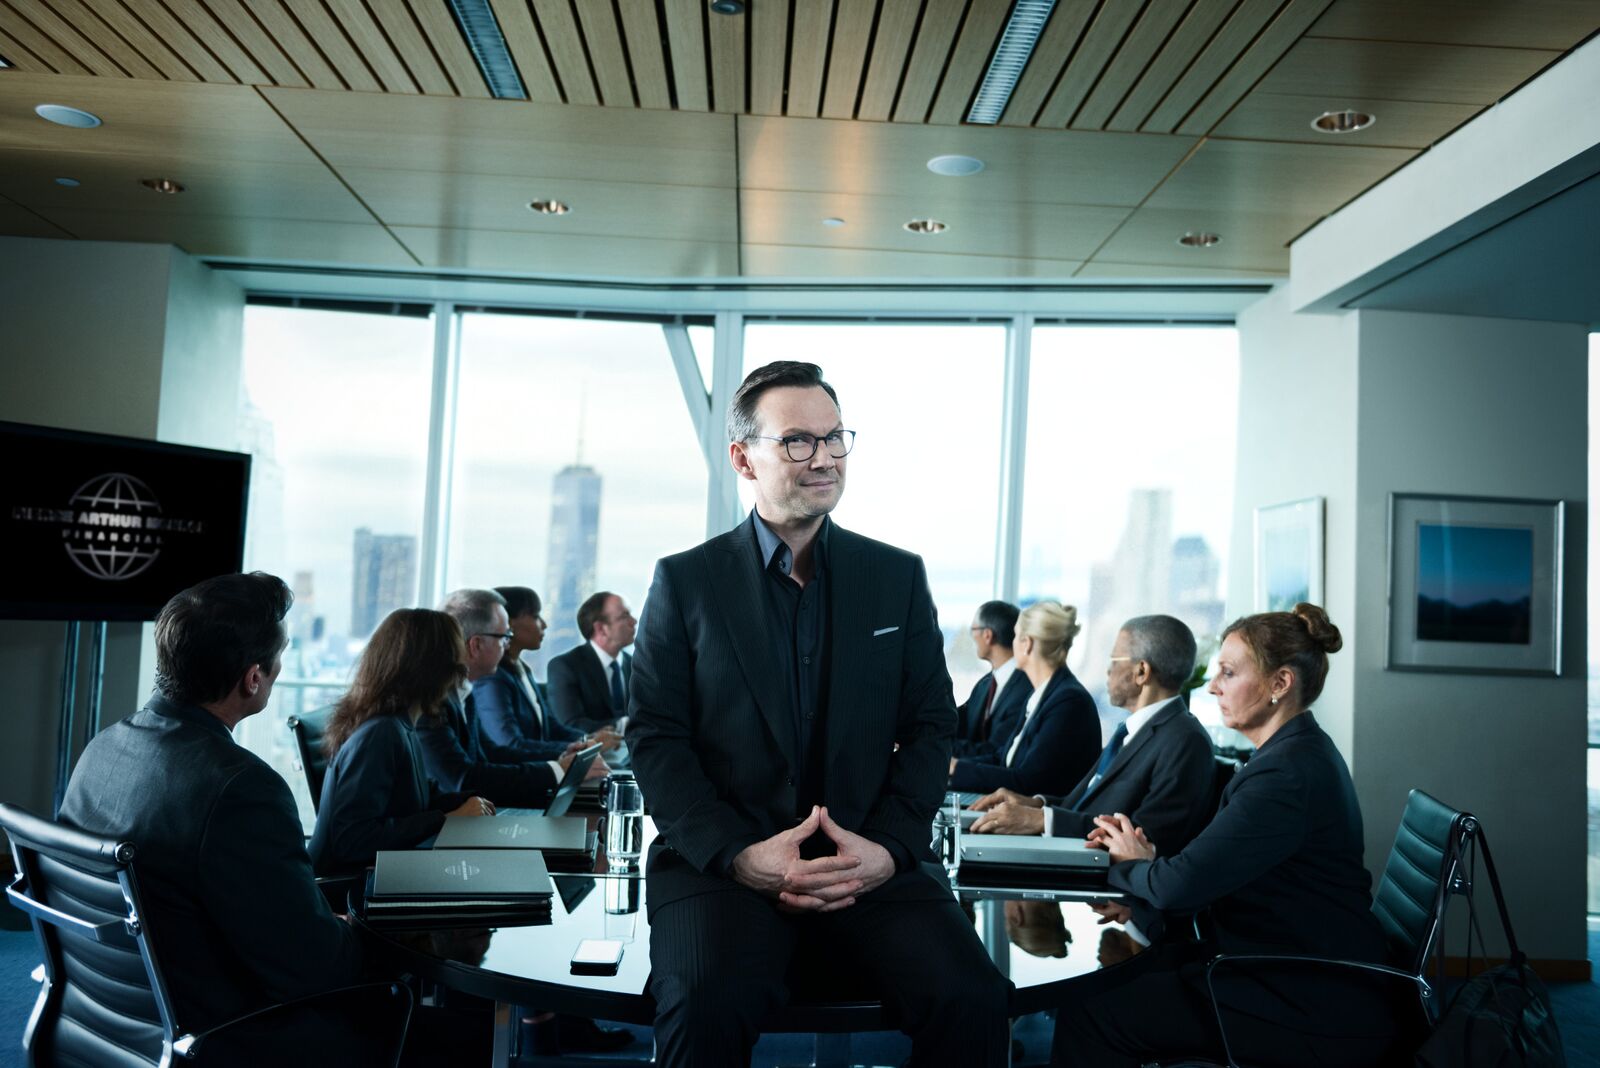 HP stars Christian Slater on a web series for HP Secure global campaign